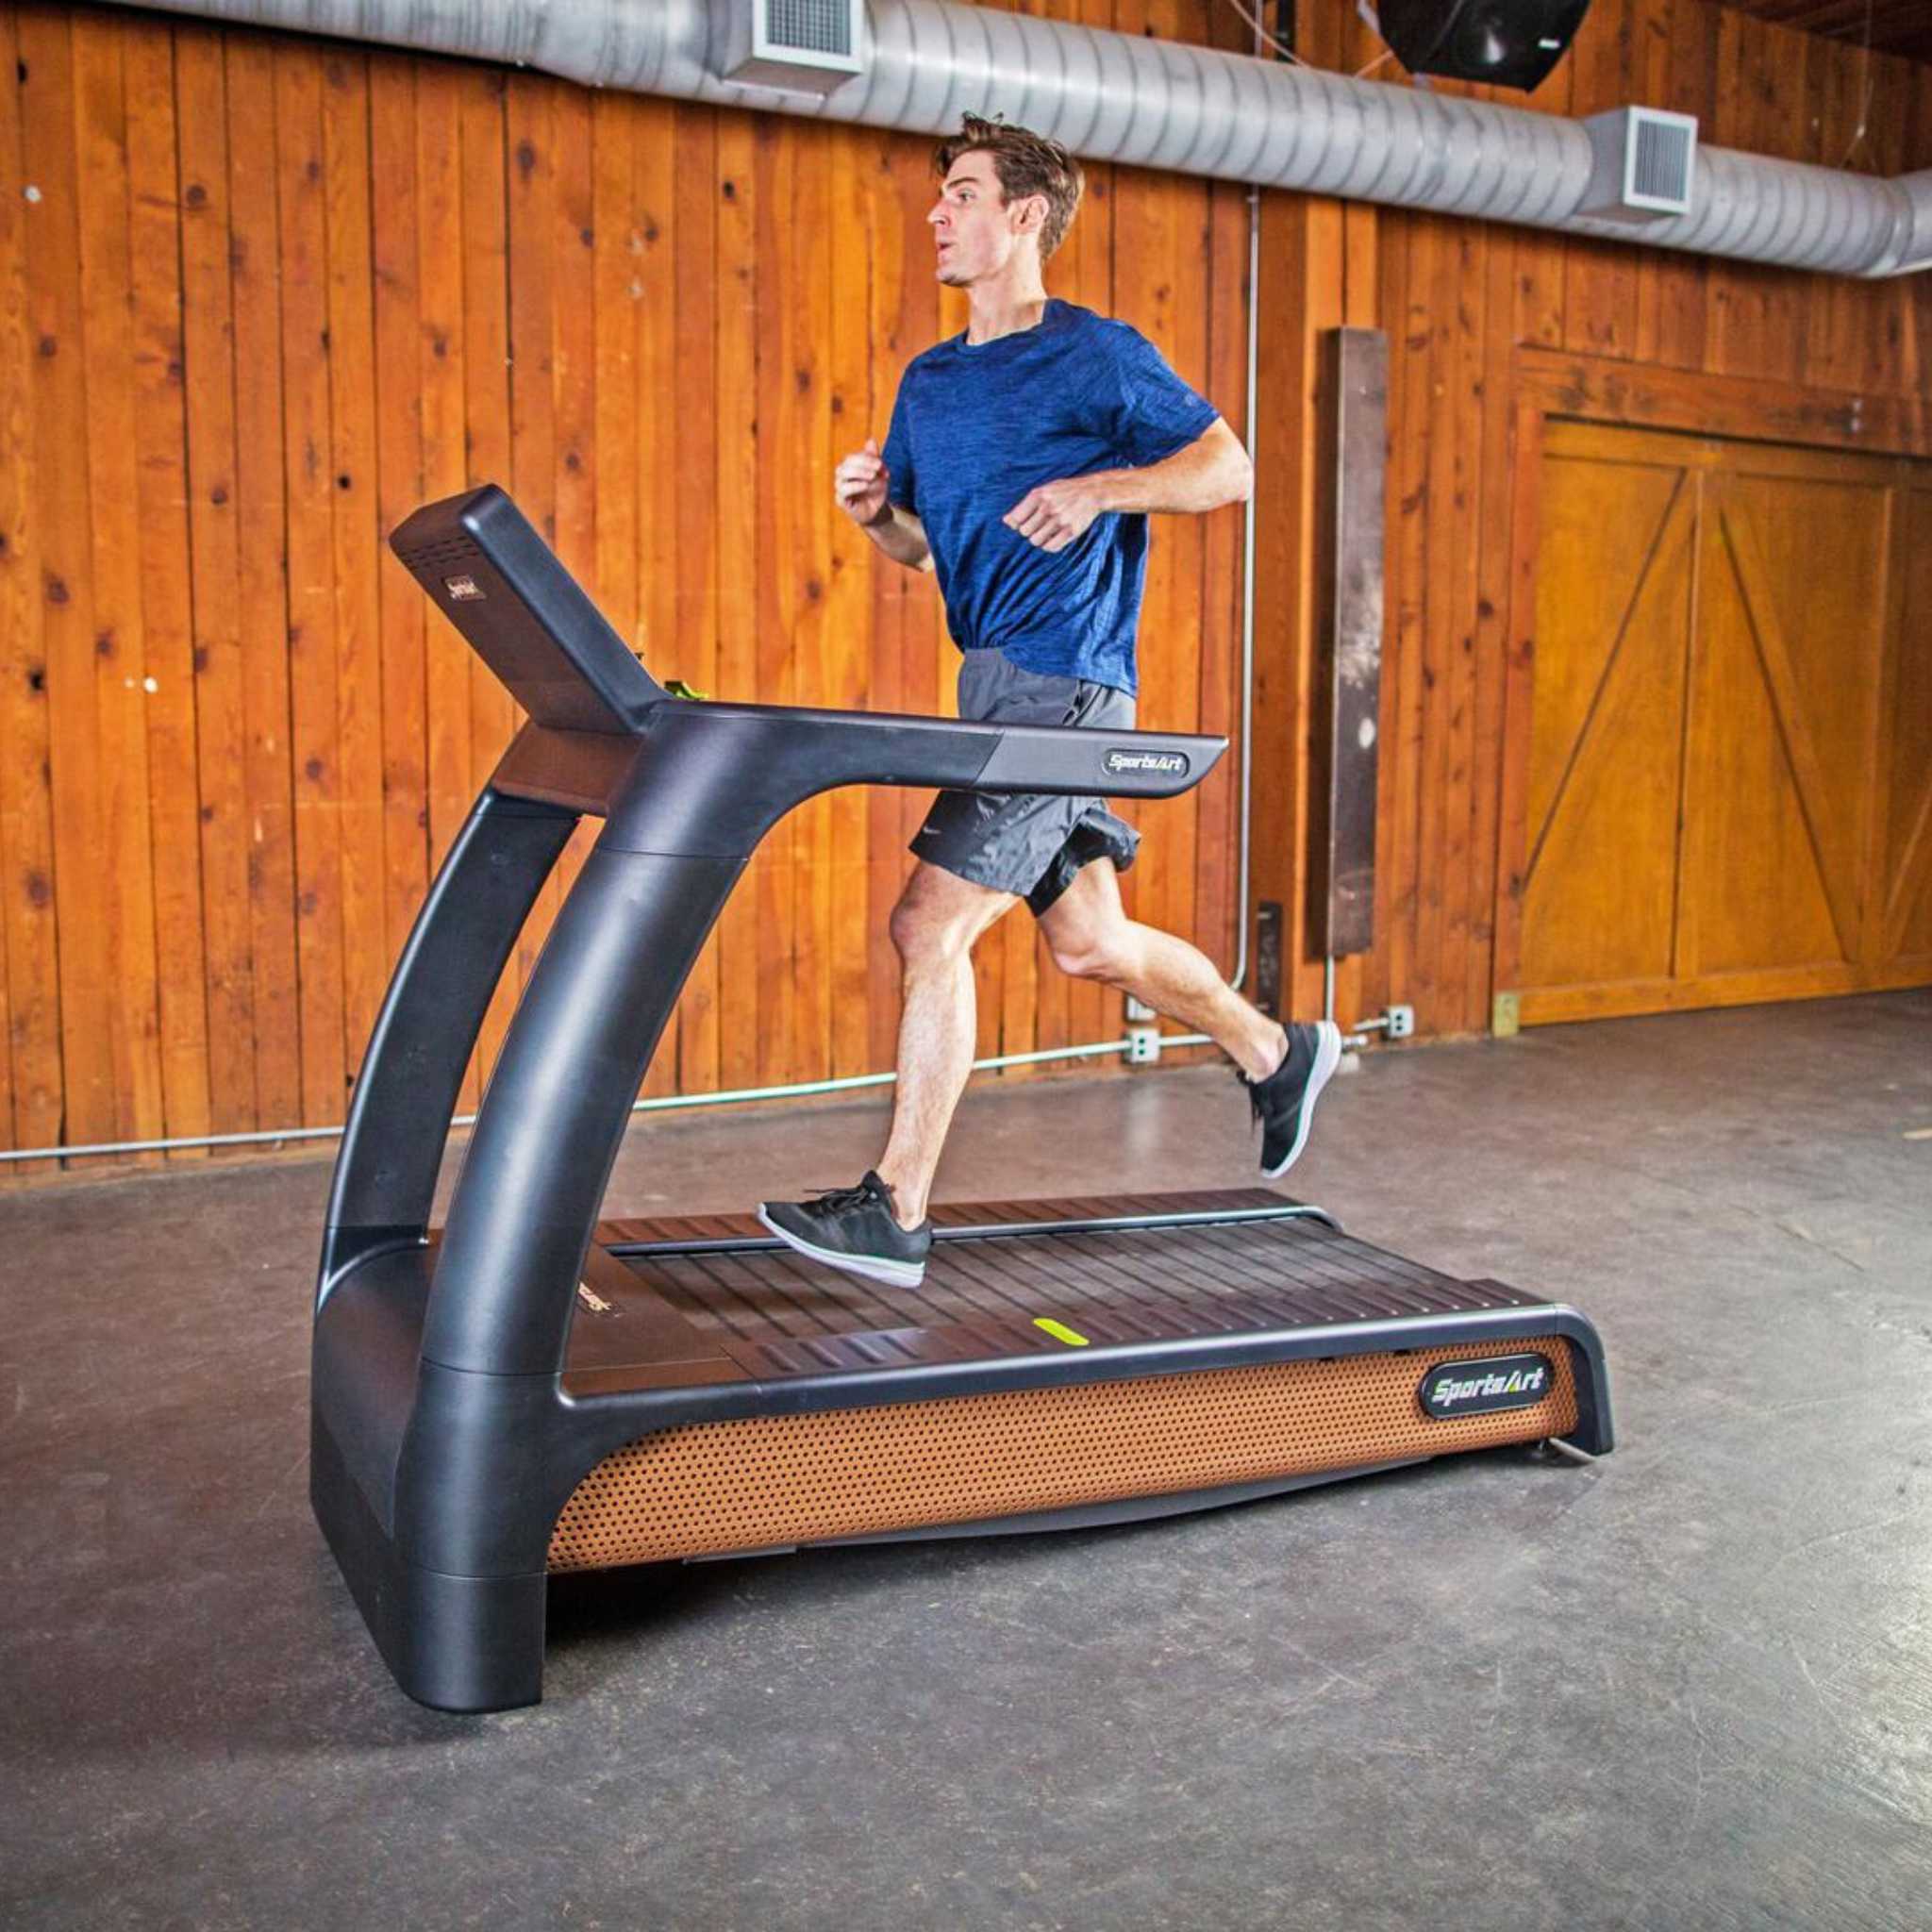 N685 Treadmill For Sale By SportsArt